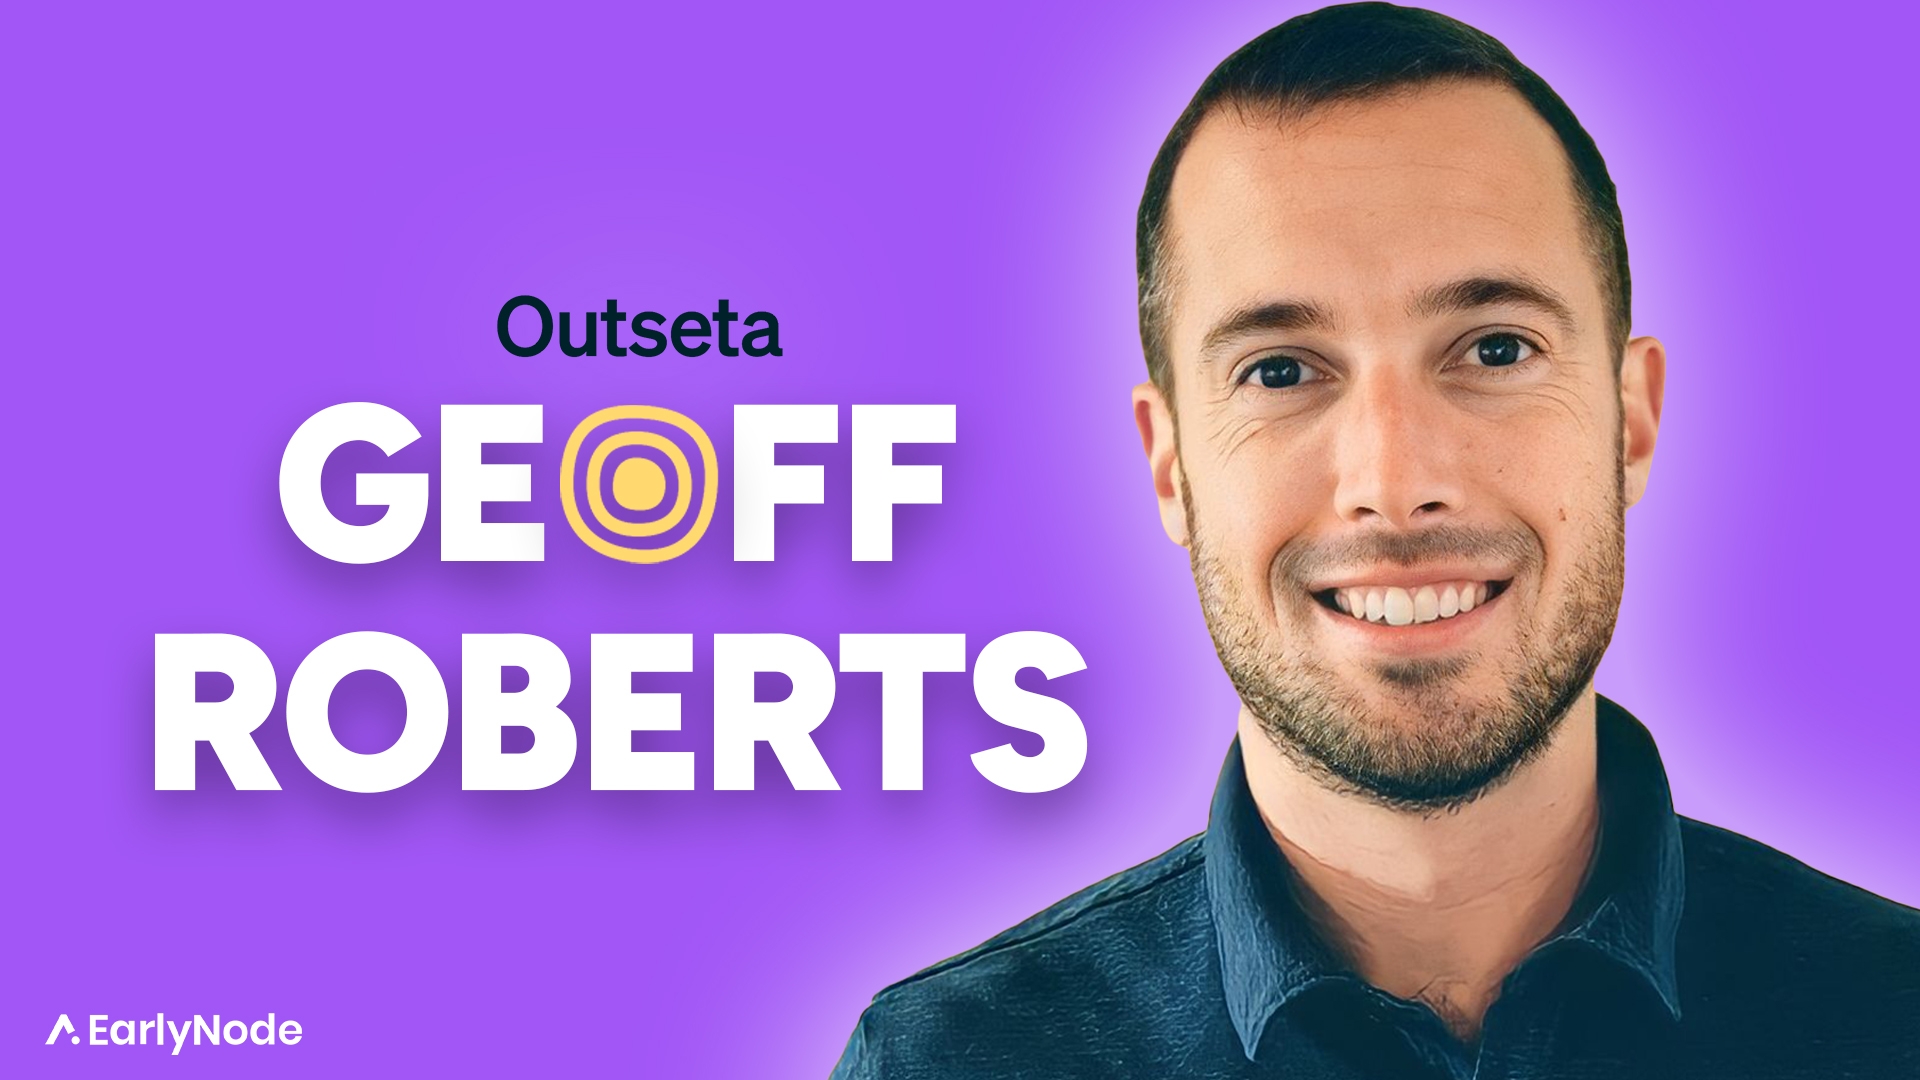 A contrarian way to build a SaaS company with Outseta co-founder Geoff Roberts